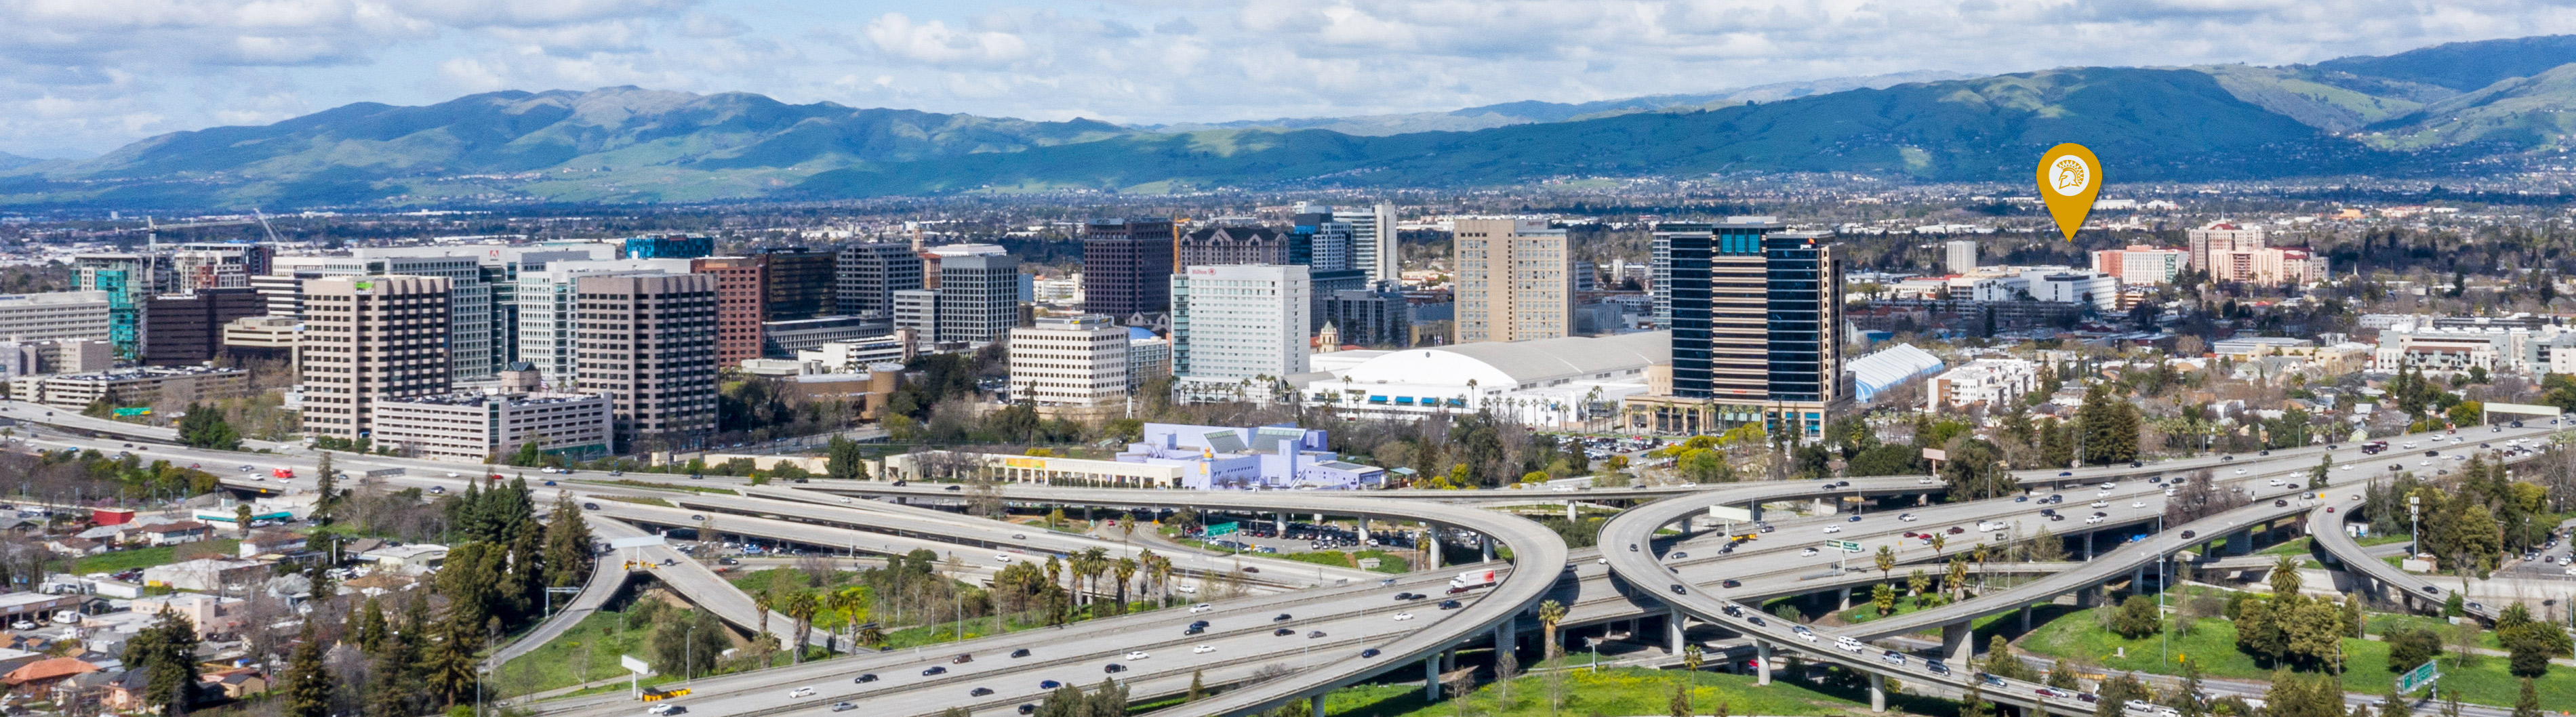 An aerial view of San Jose City with a gold spartan pin that points to the location of SJSU.